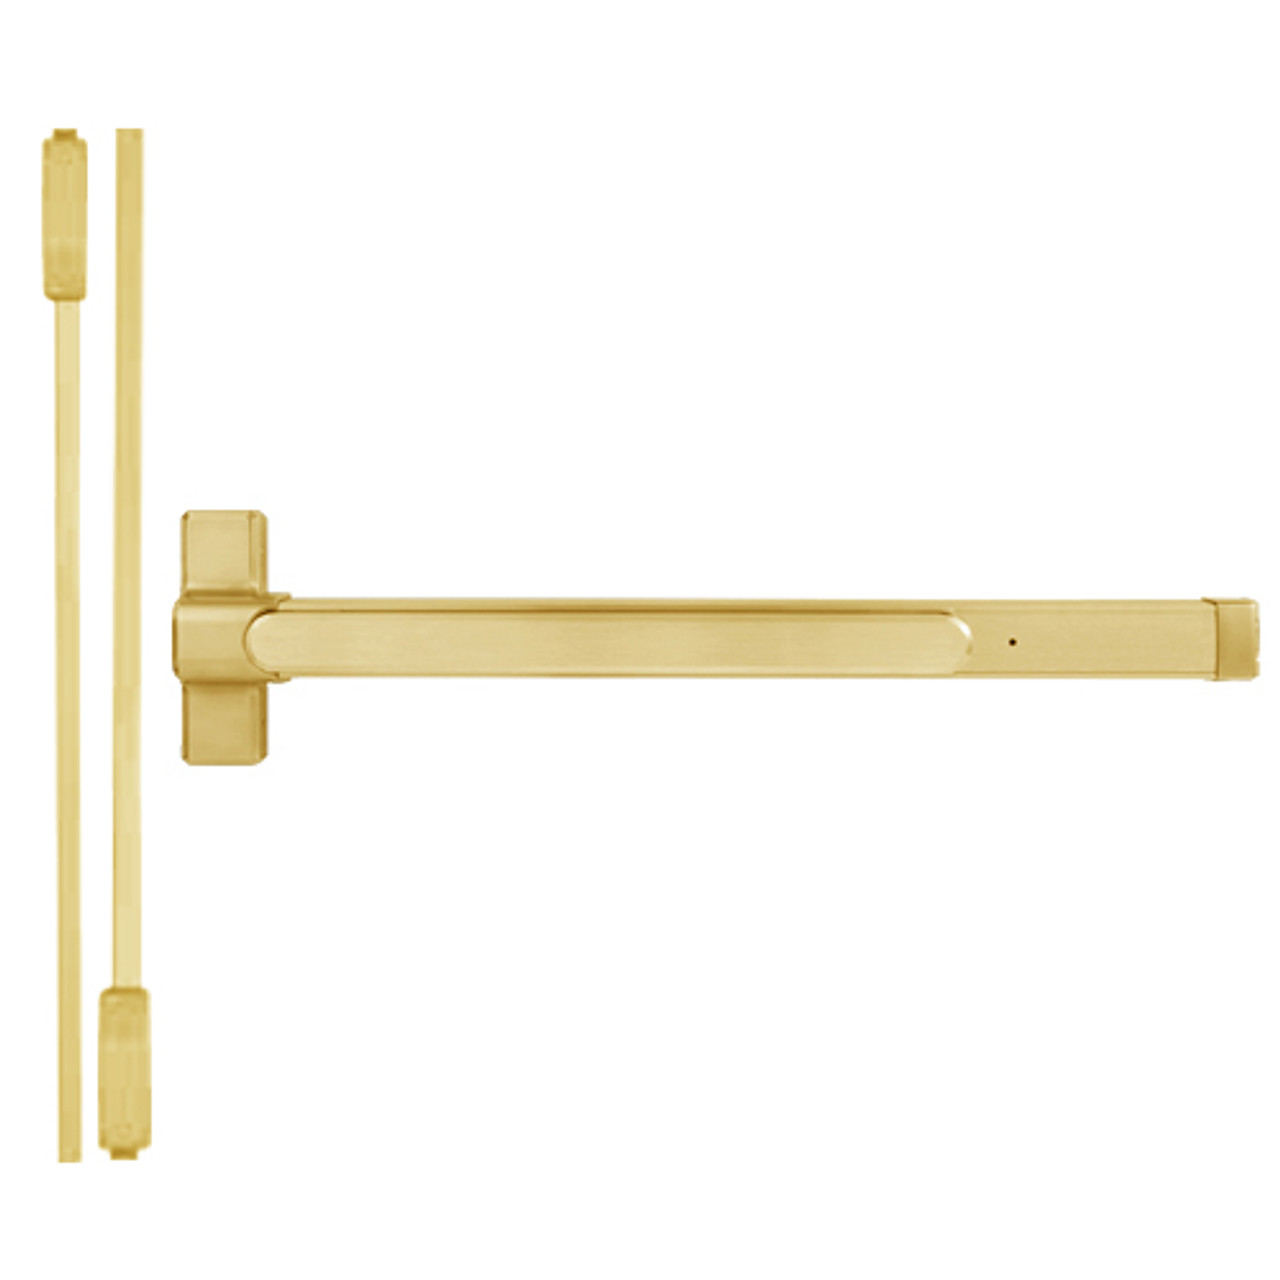 QED114X-36-7-605 Stanley QED100 Series Heavy Duty Surface Vertical Rod Hex Dog Exit Device in Bright Brass Finish